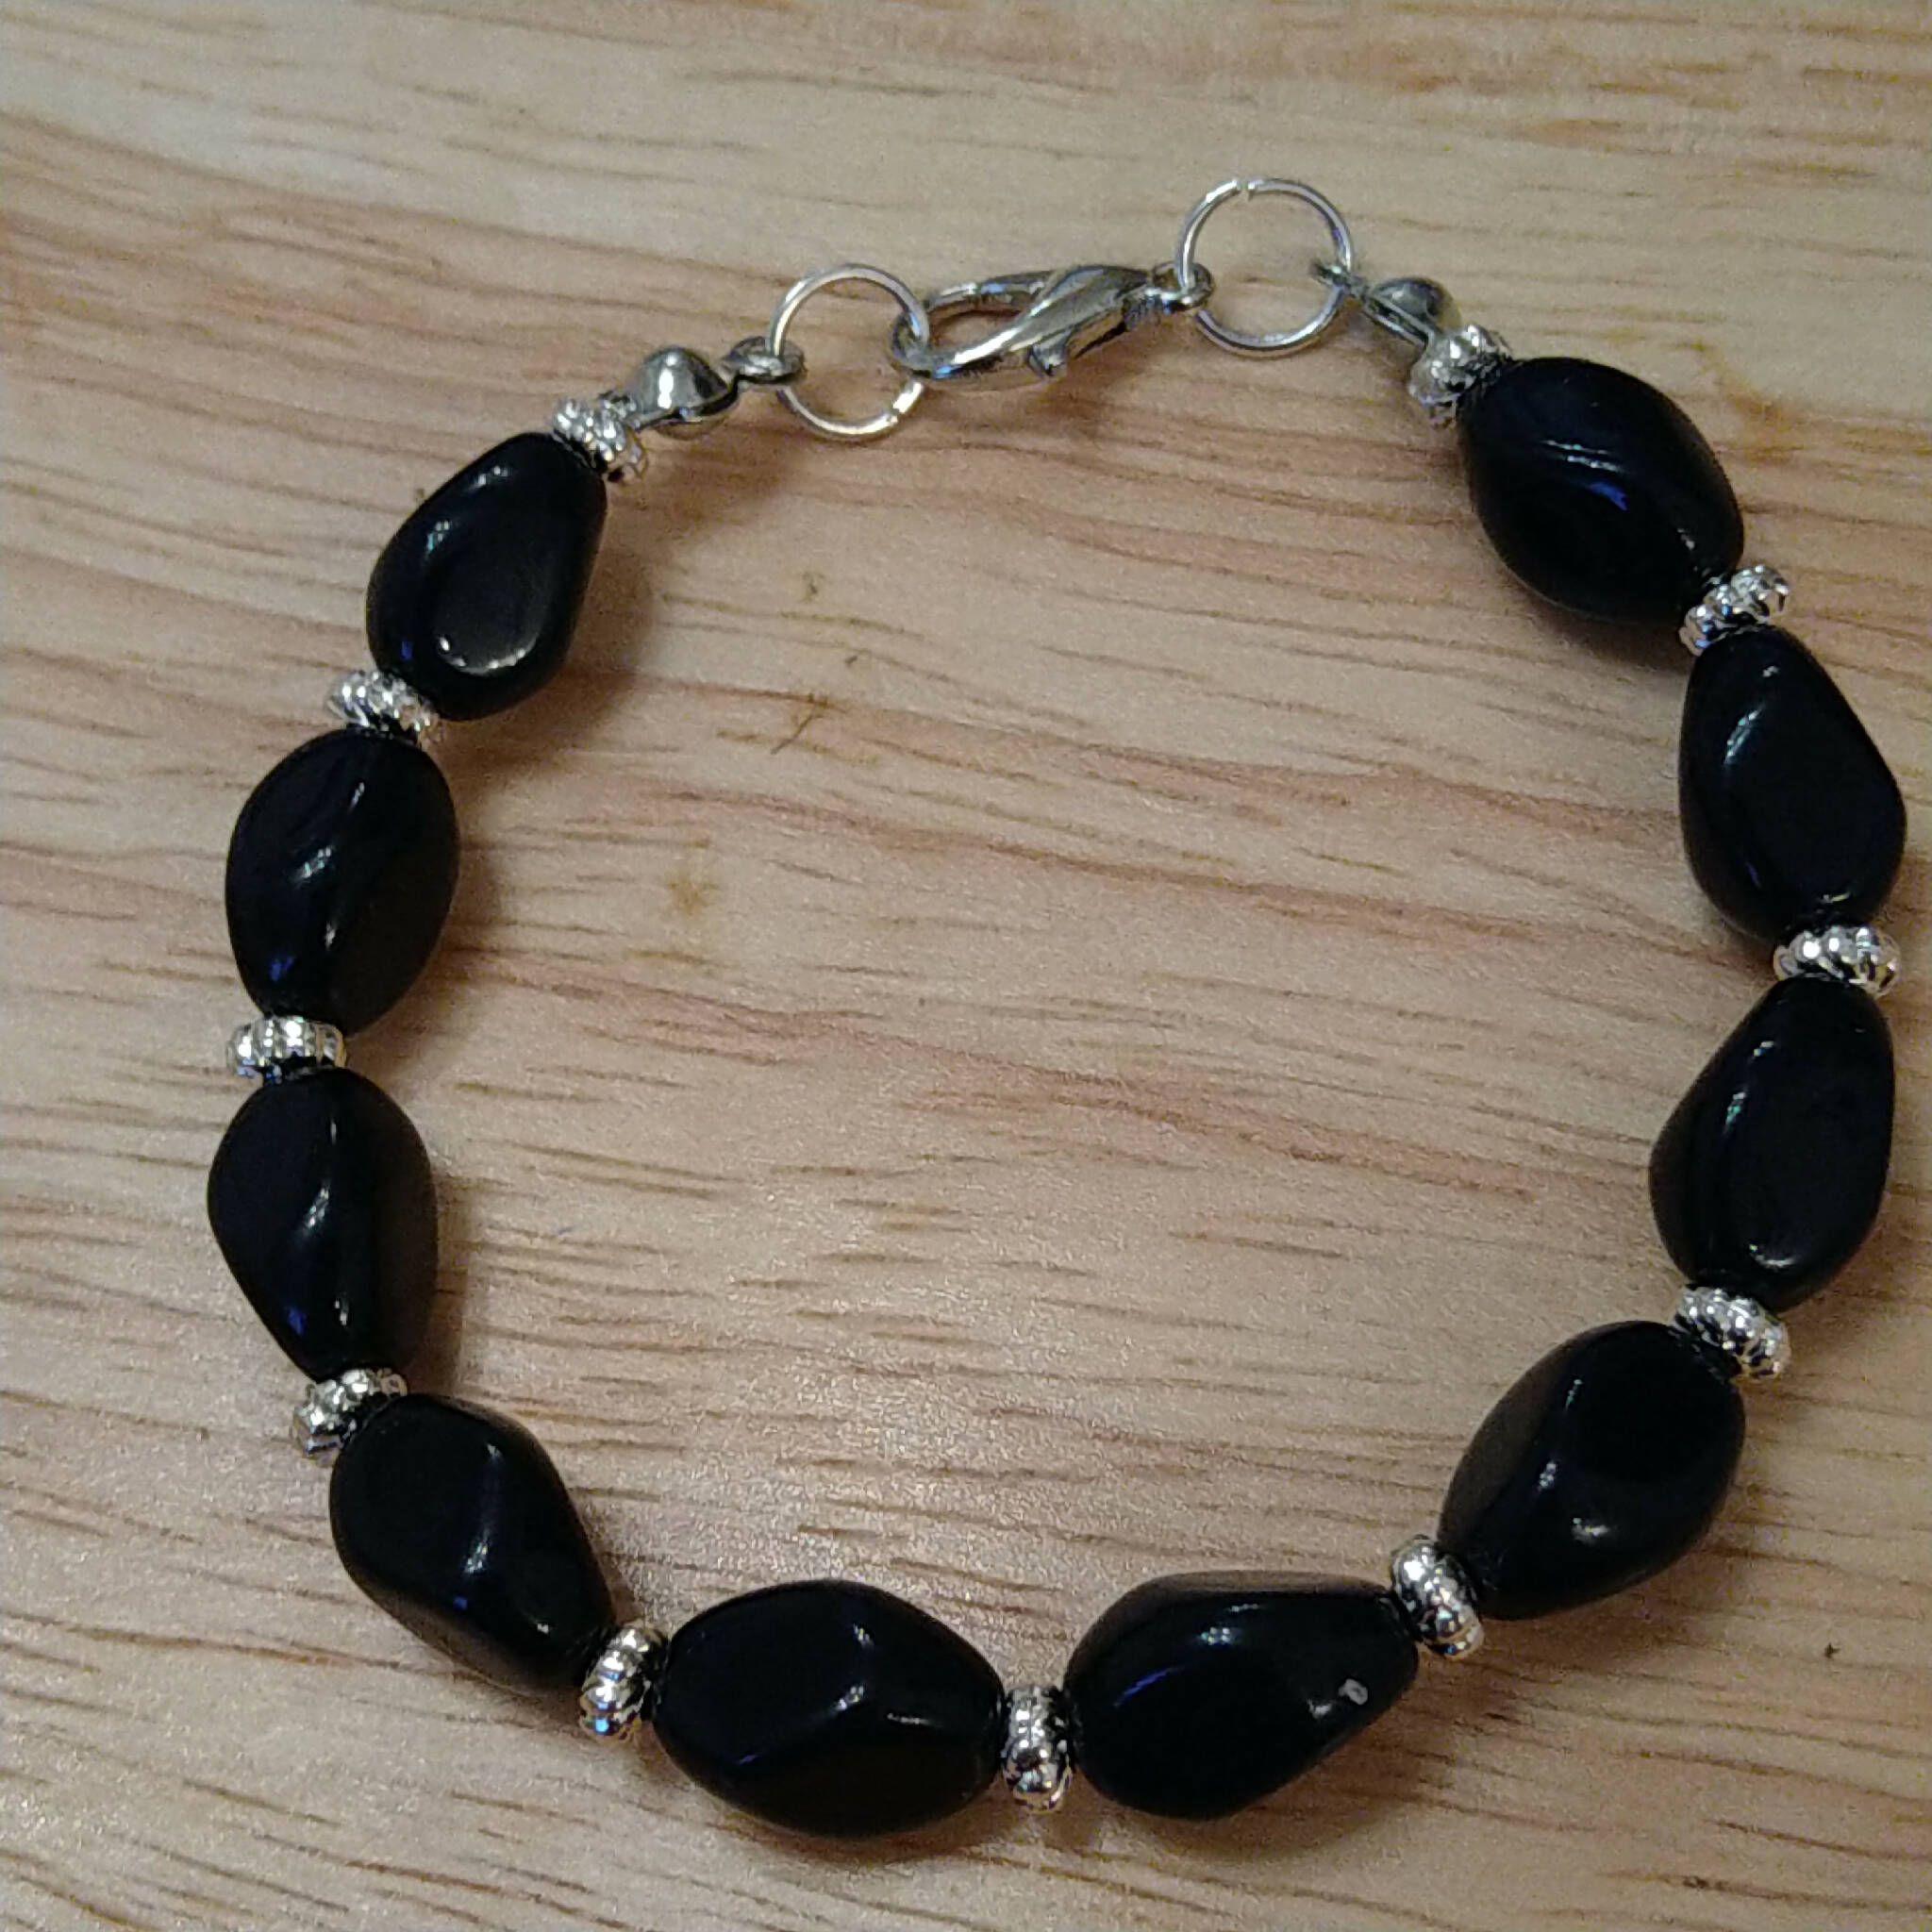 Handmade 16cm bracelet with recycled Navy Blue beads & silver spacers